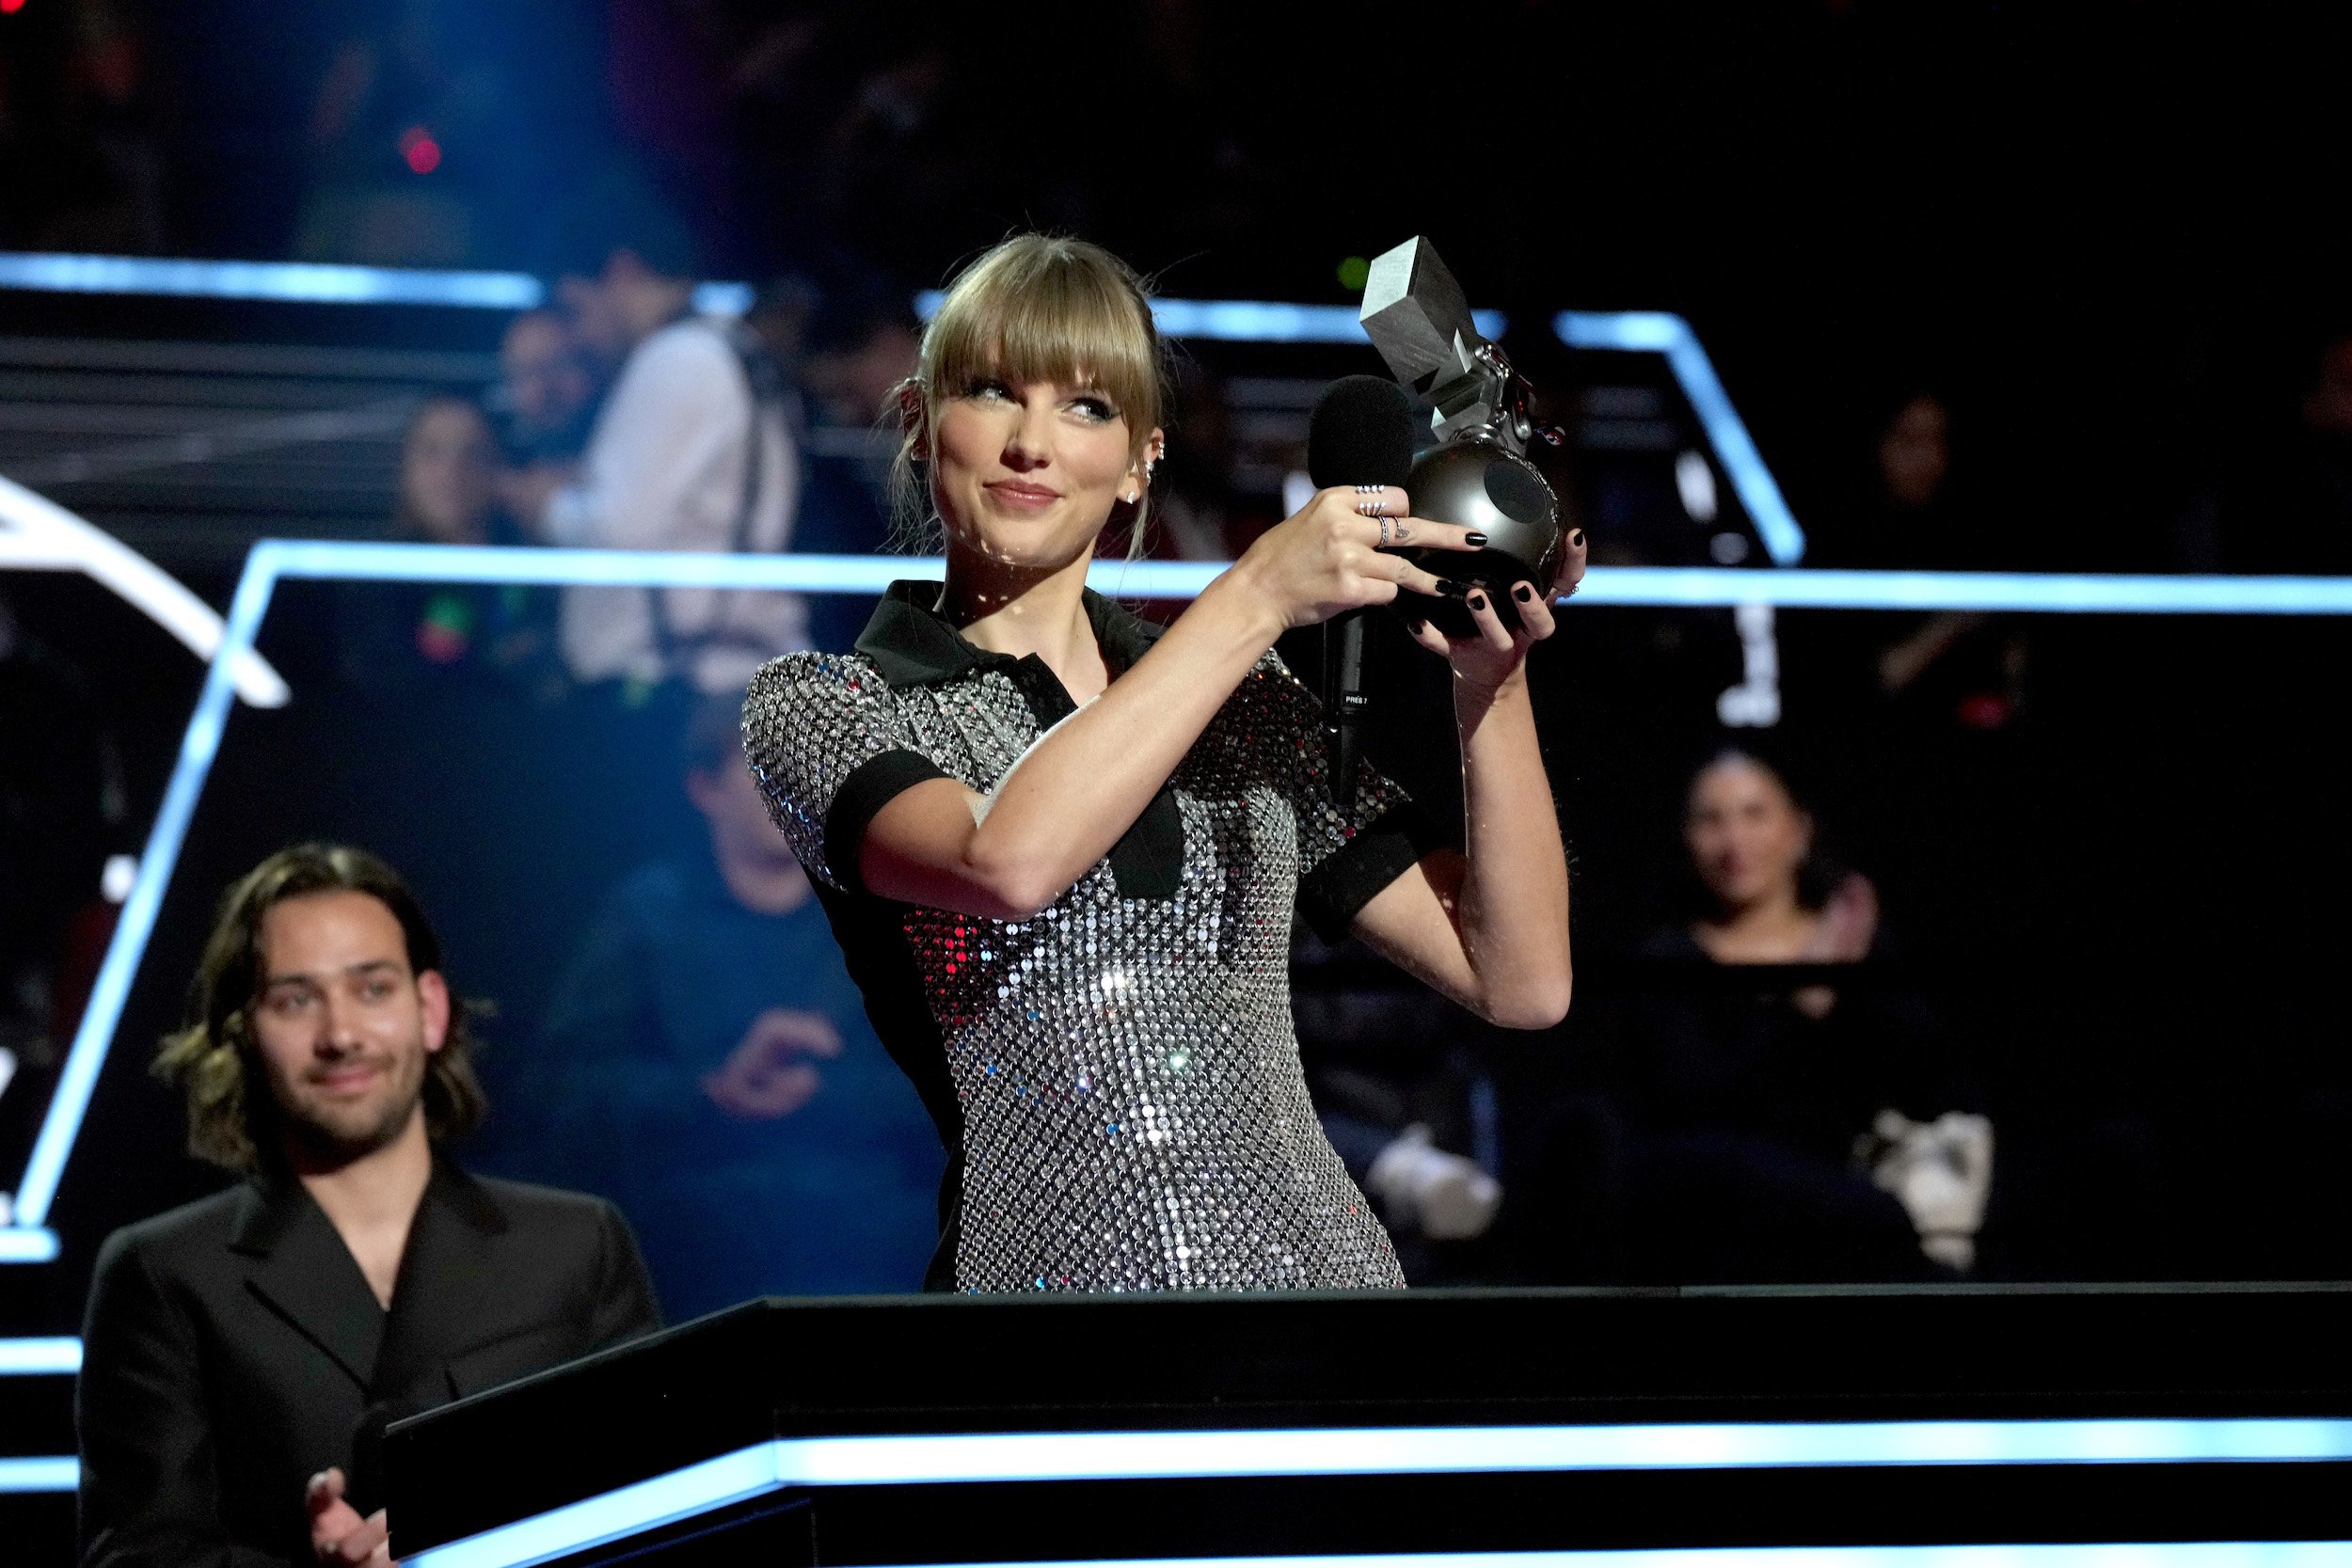 Taylor Swift accepts an award during the 2022 MTV Europe Music Awards in Germany